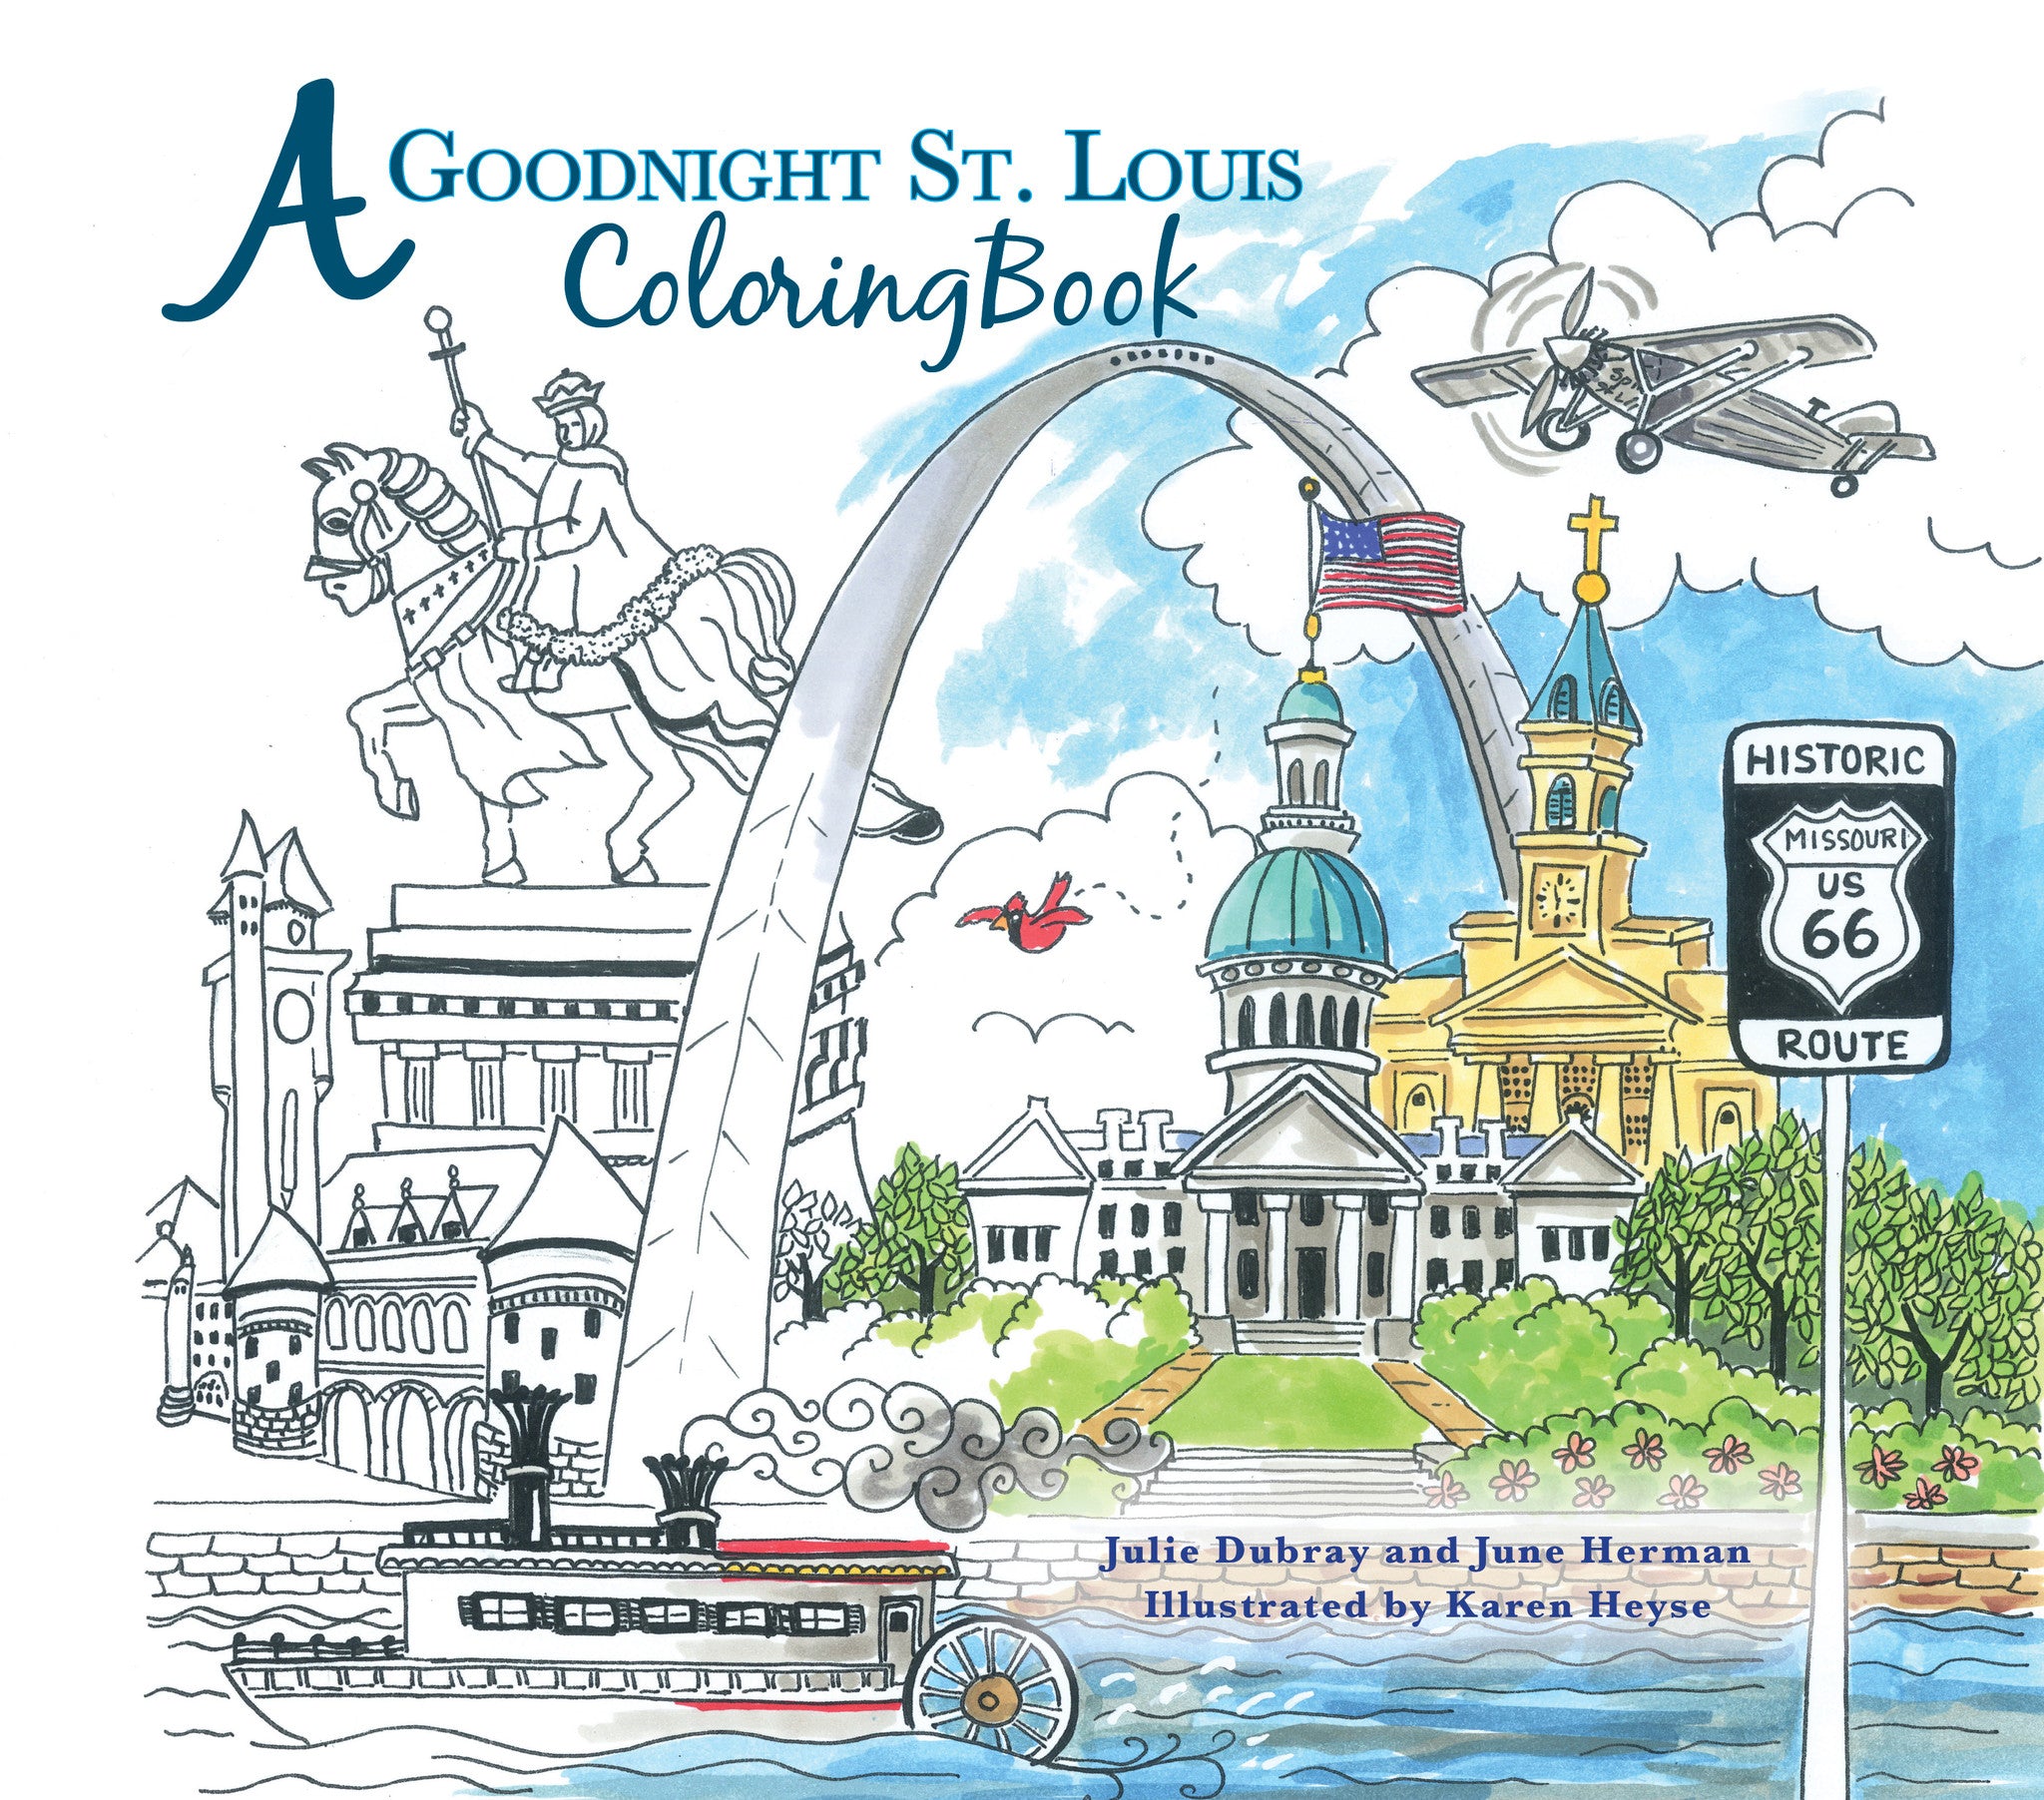 Want to Purchase A Goodnight St Louis Coloring Book Locally?